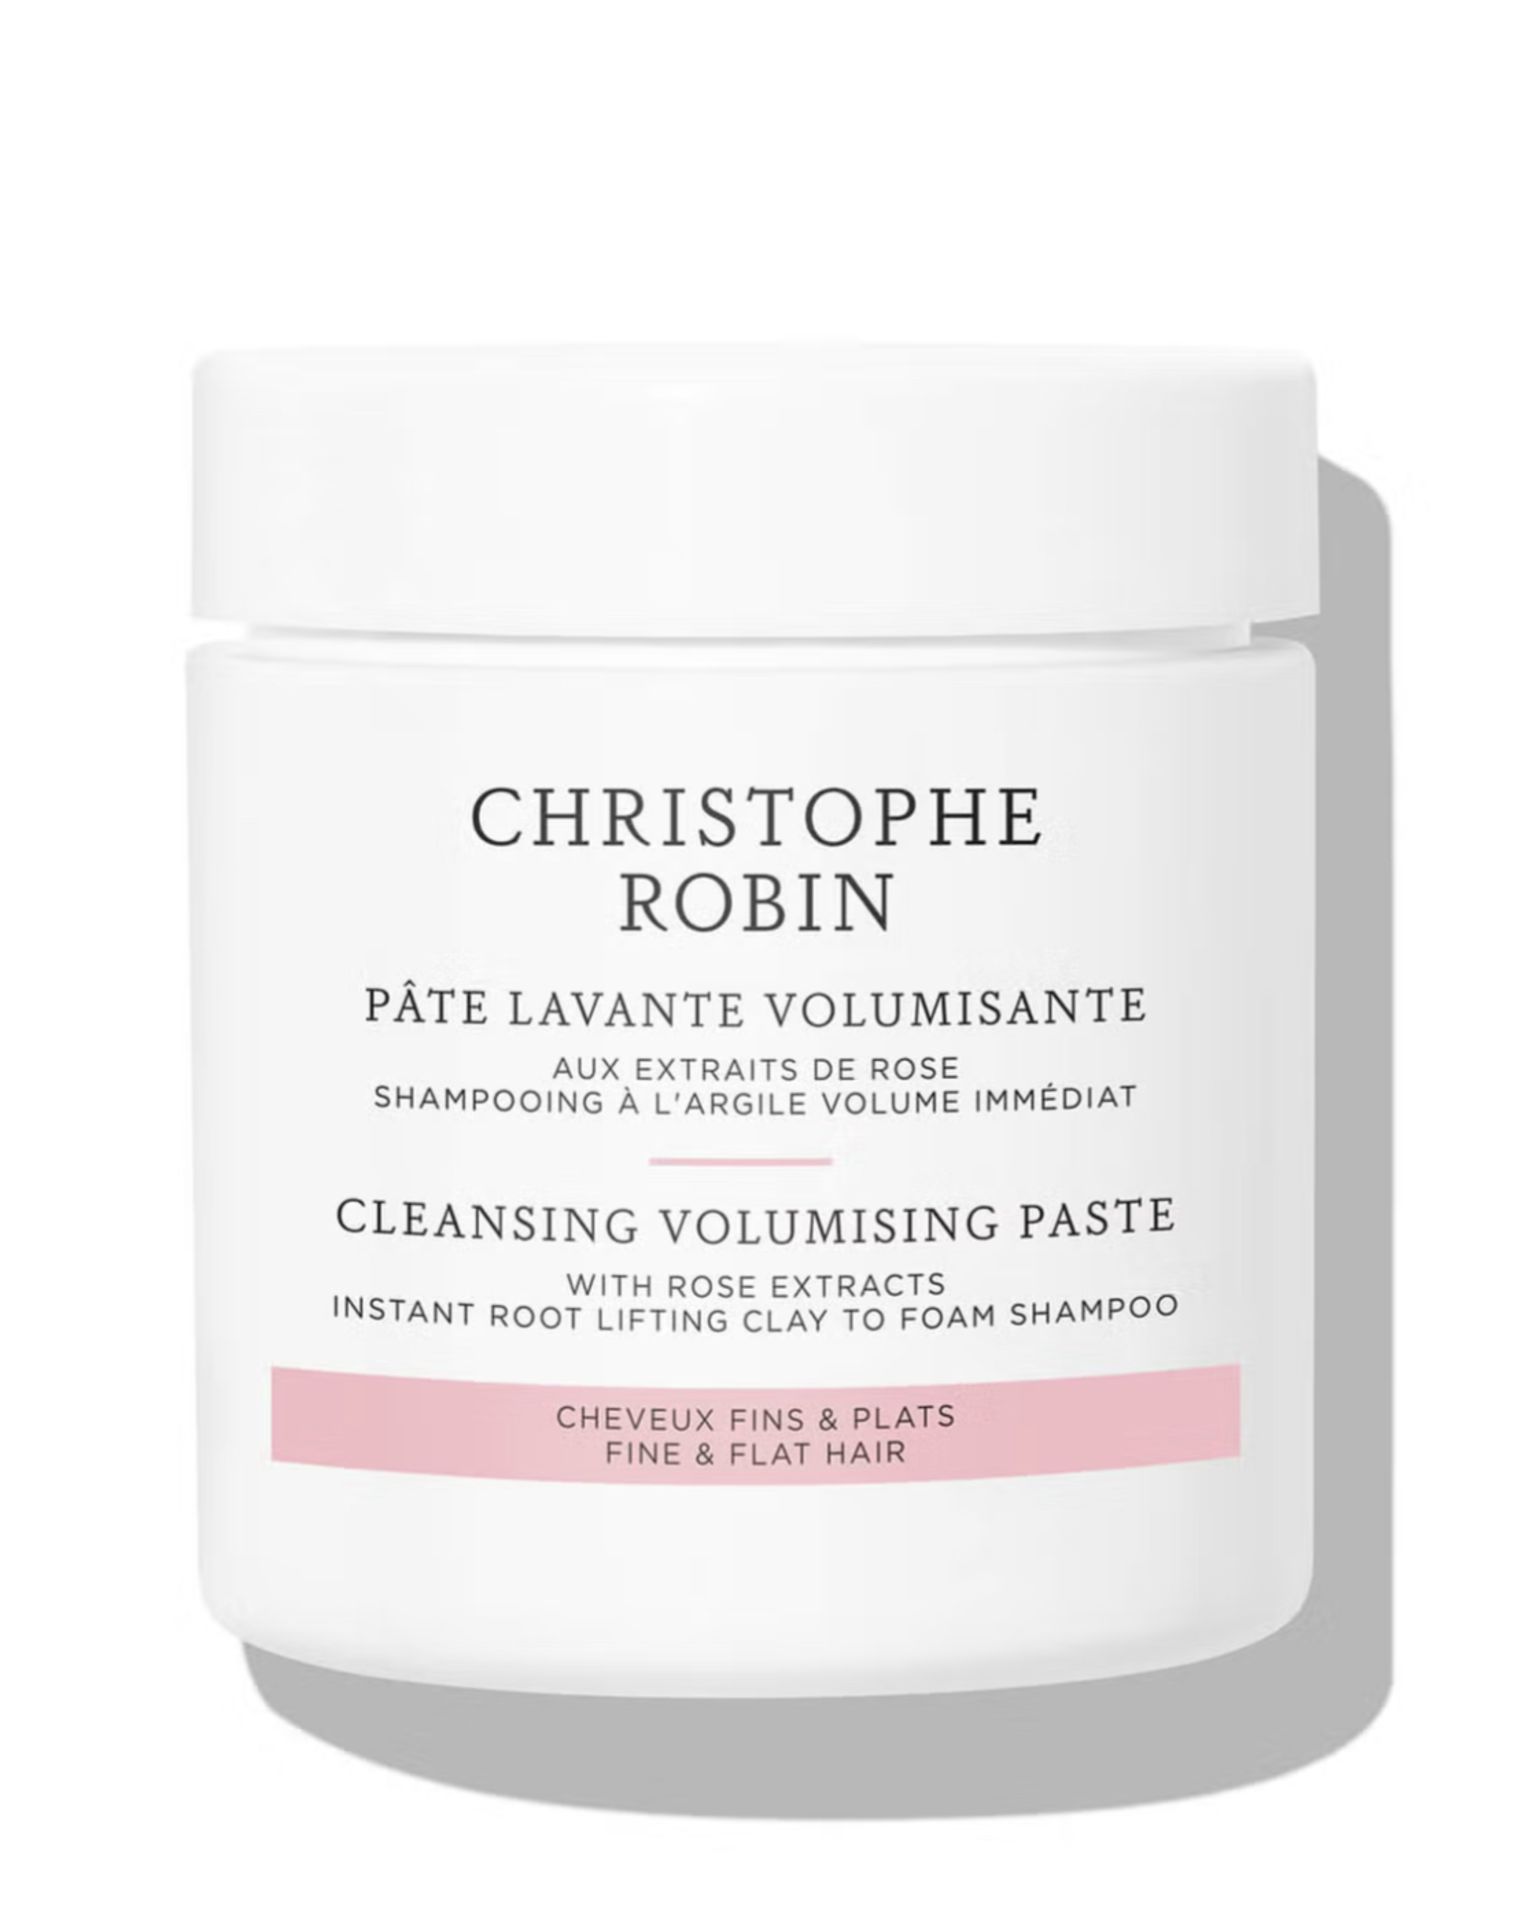 600 X CHRISTOPHE ROBIN CLEANSING VOLUMISING PASTE WITH ROSE EXTRACTS 12ML SACHET RRP1800